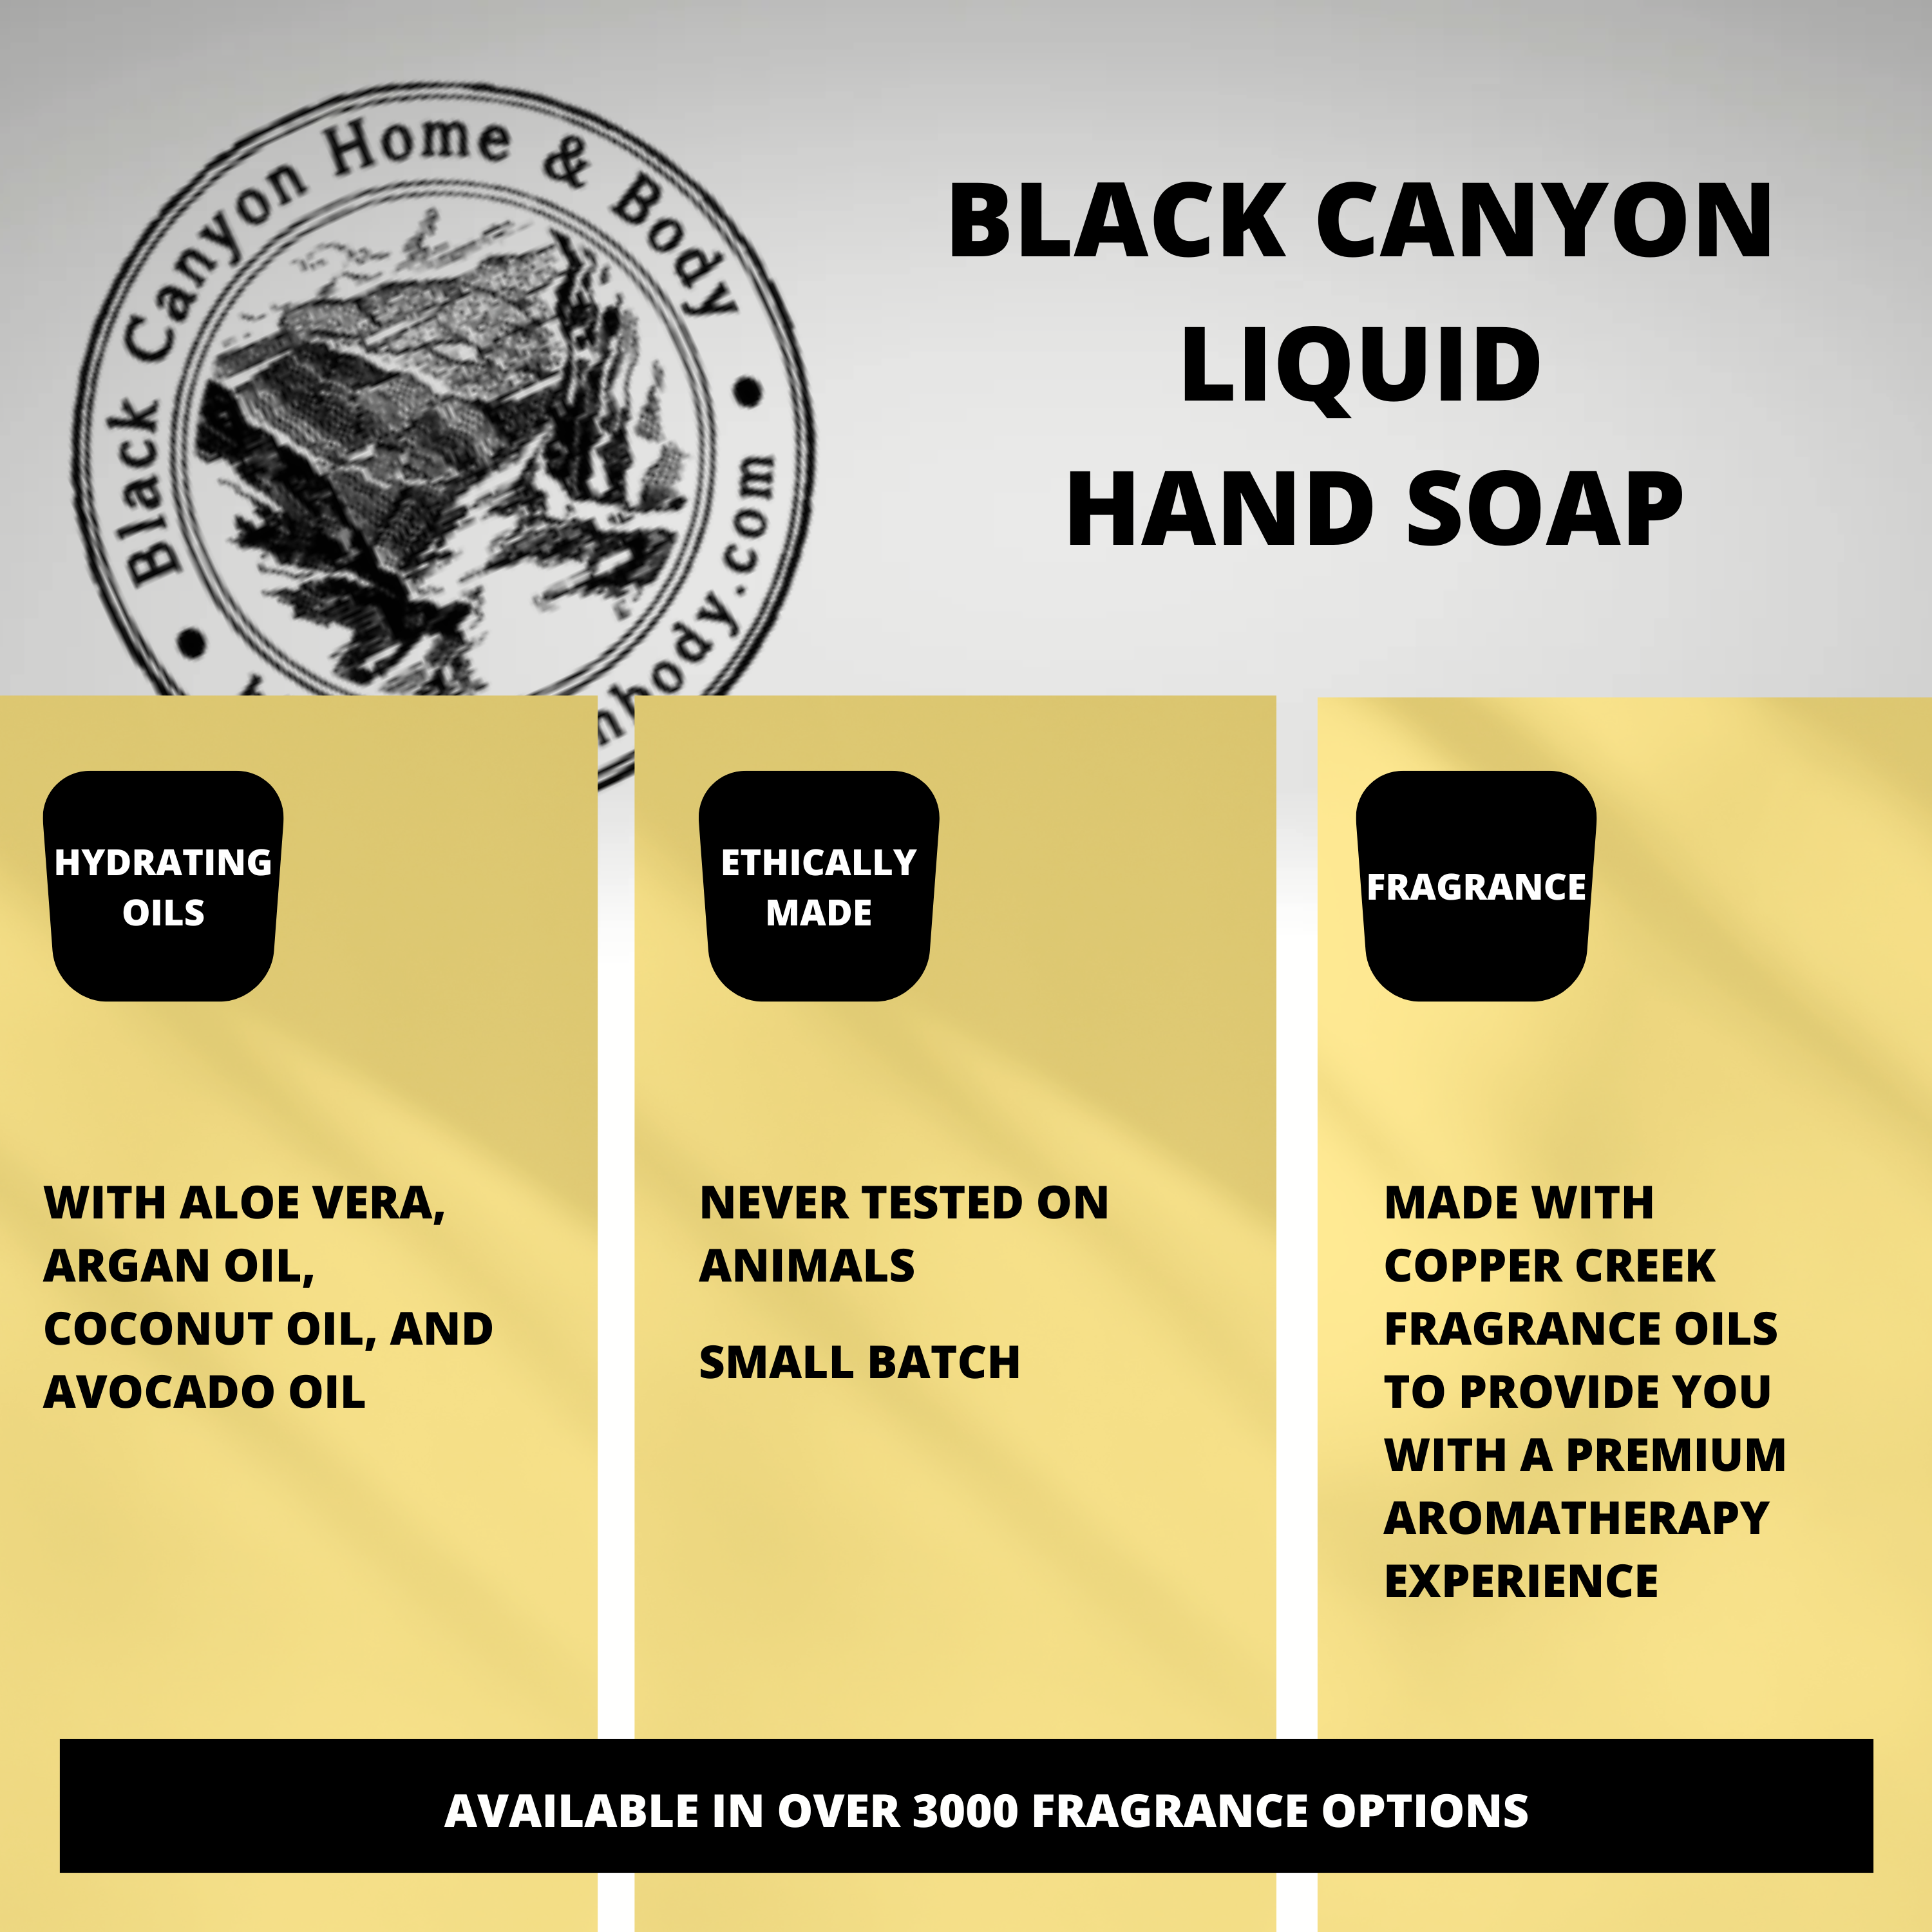 Black Canyon Gingerbread Spiced Cookie Scented Liquid Hand Soap